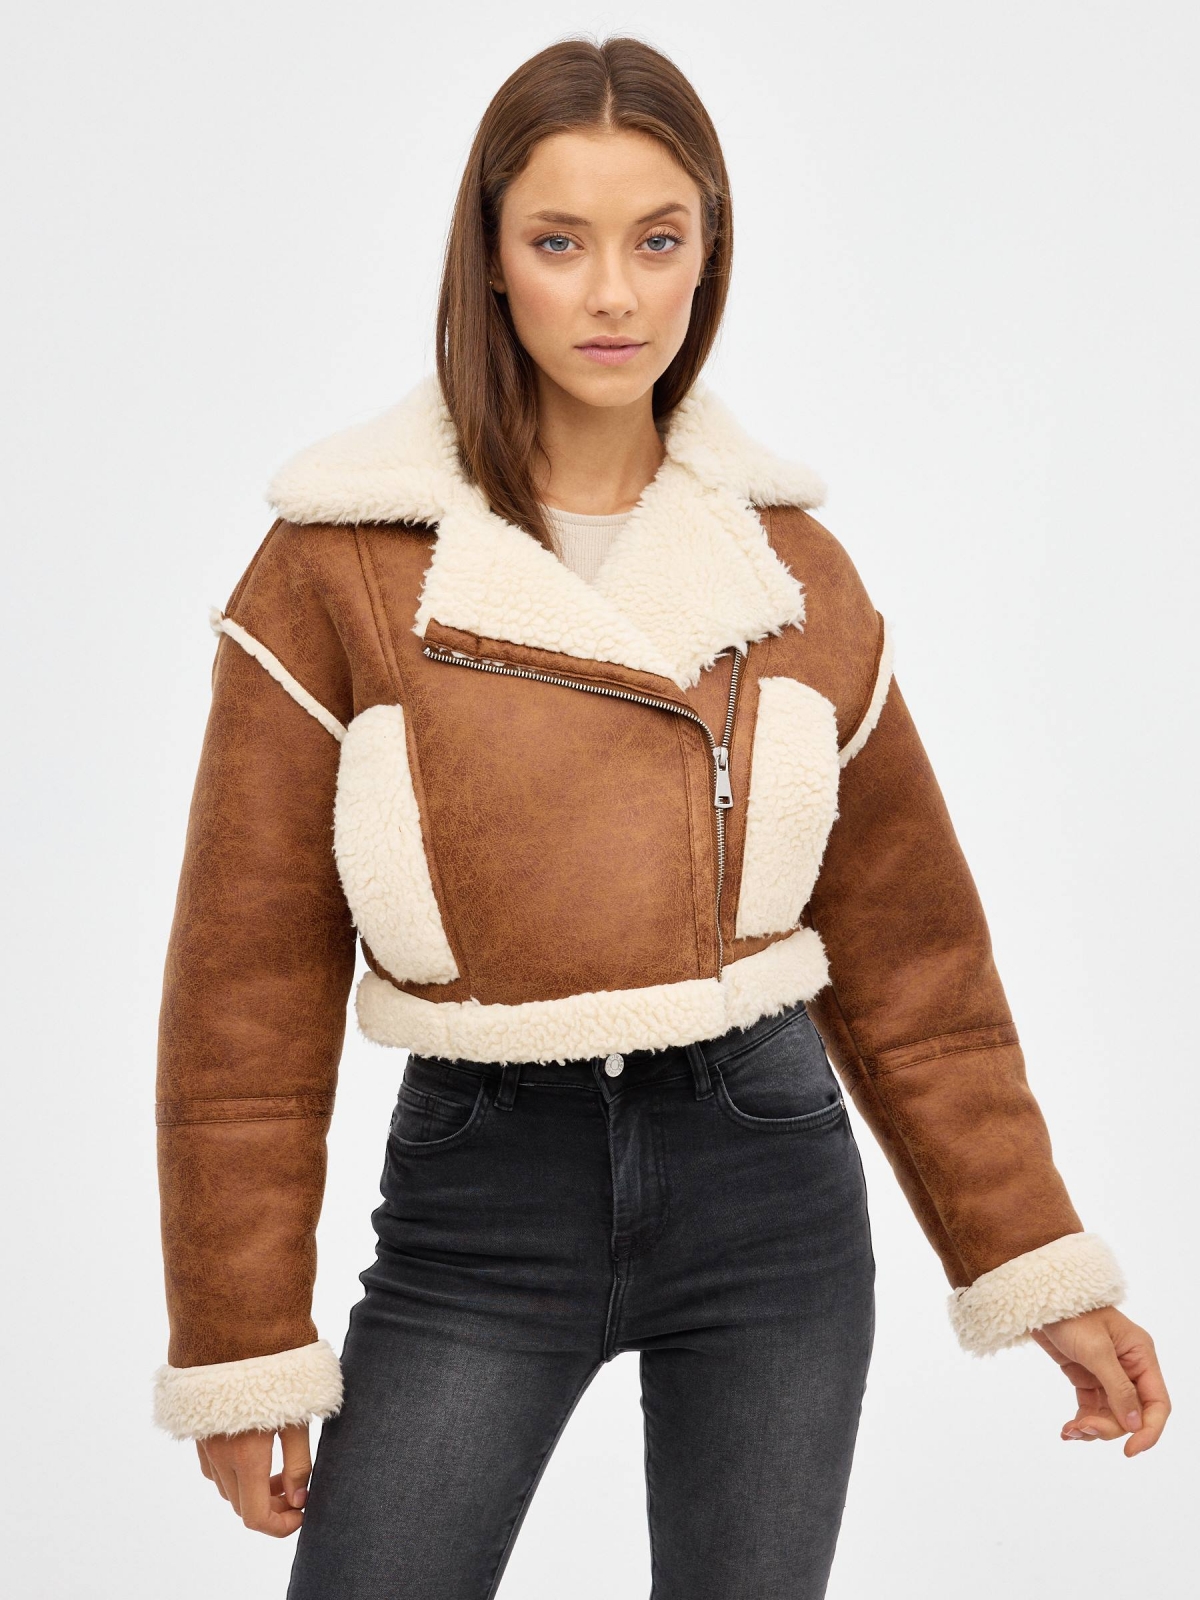 Aviator jacket sheep sheepskin brown middle front view